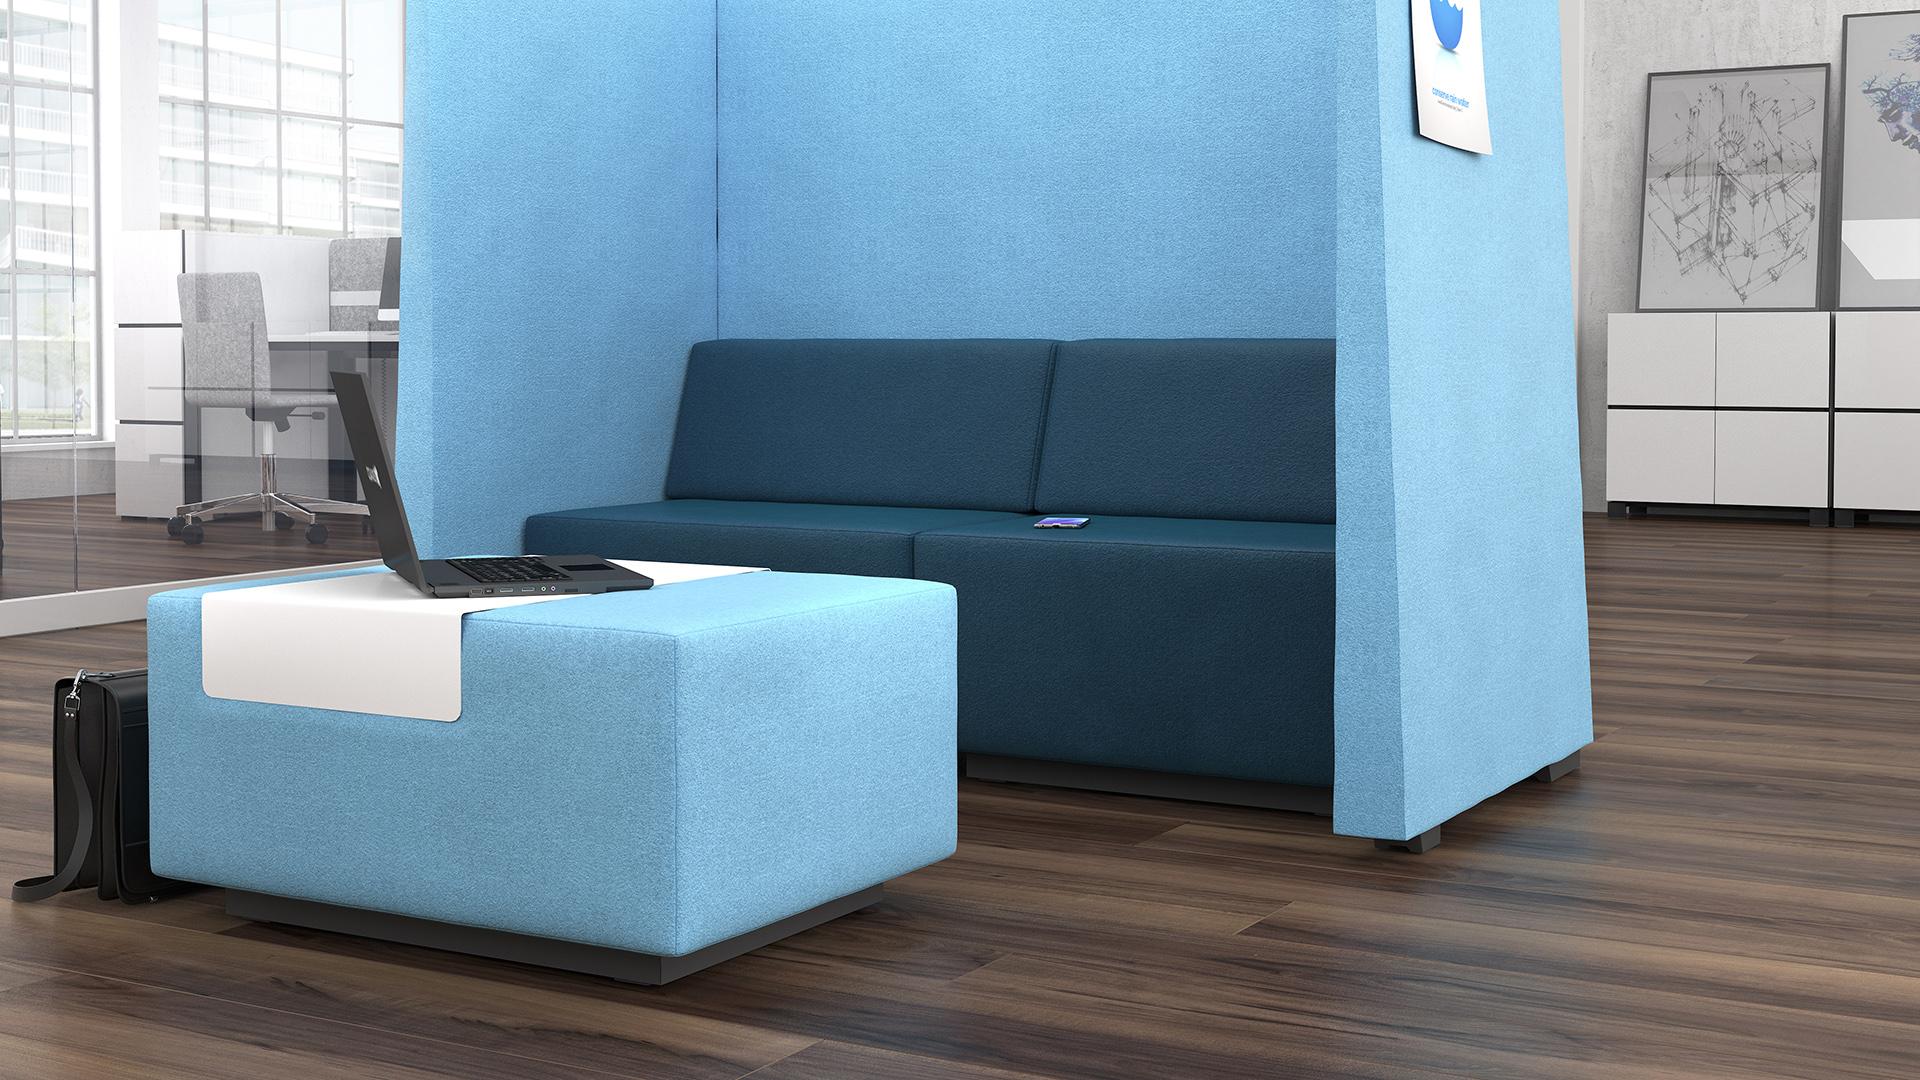 Jazz Silent meeting booth with sofa and pouf